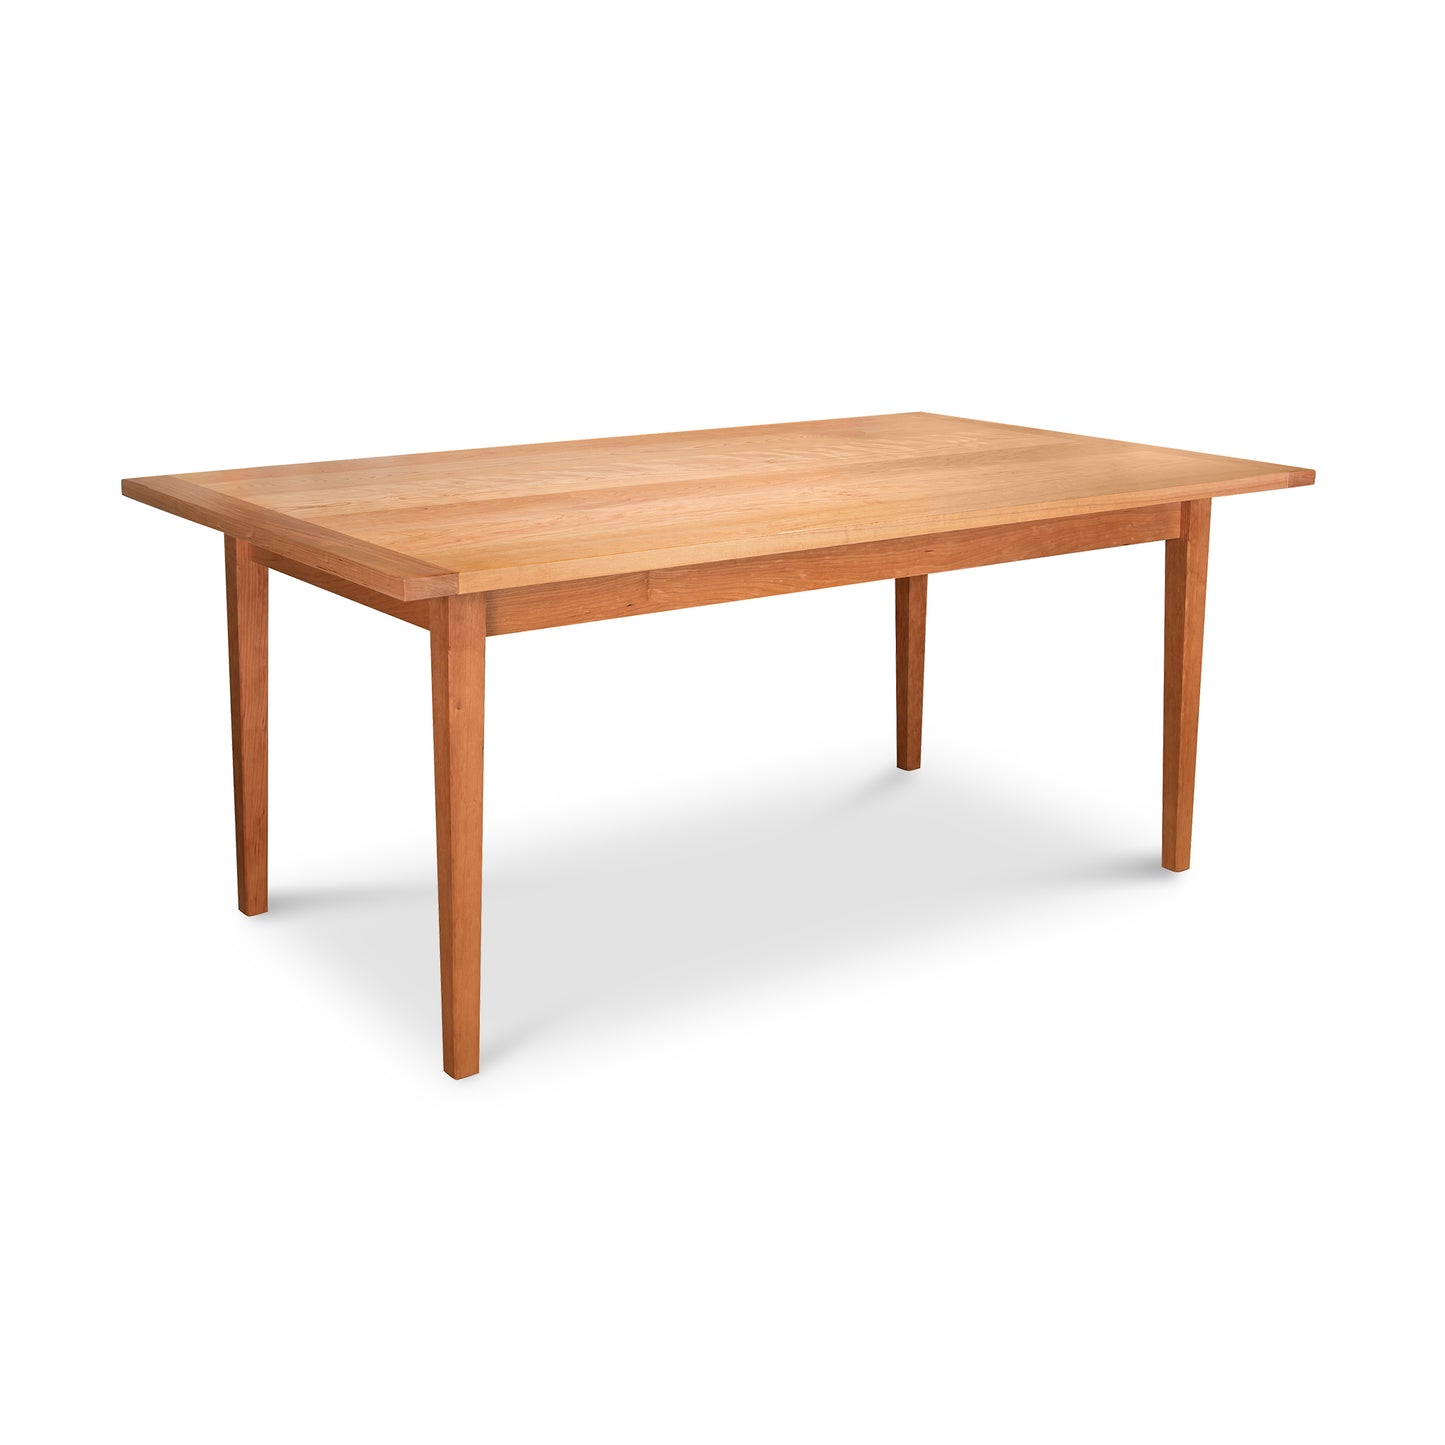 A simple Vermont Shaker Solid Top Harvest Table in natural cherry wood from Maple Corner Woodworks, with a rectangular top and four legs, isolated on a white background.